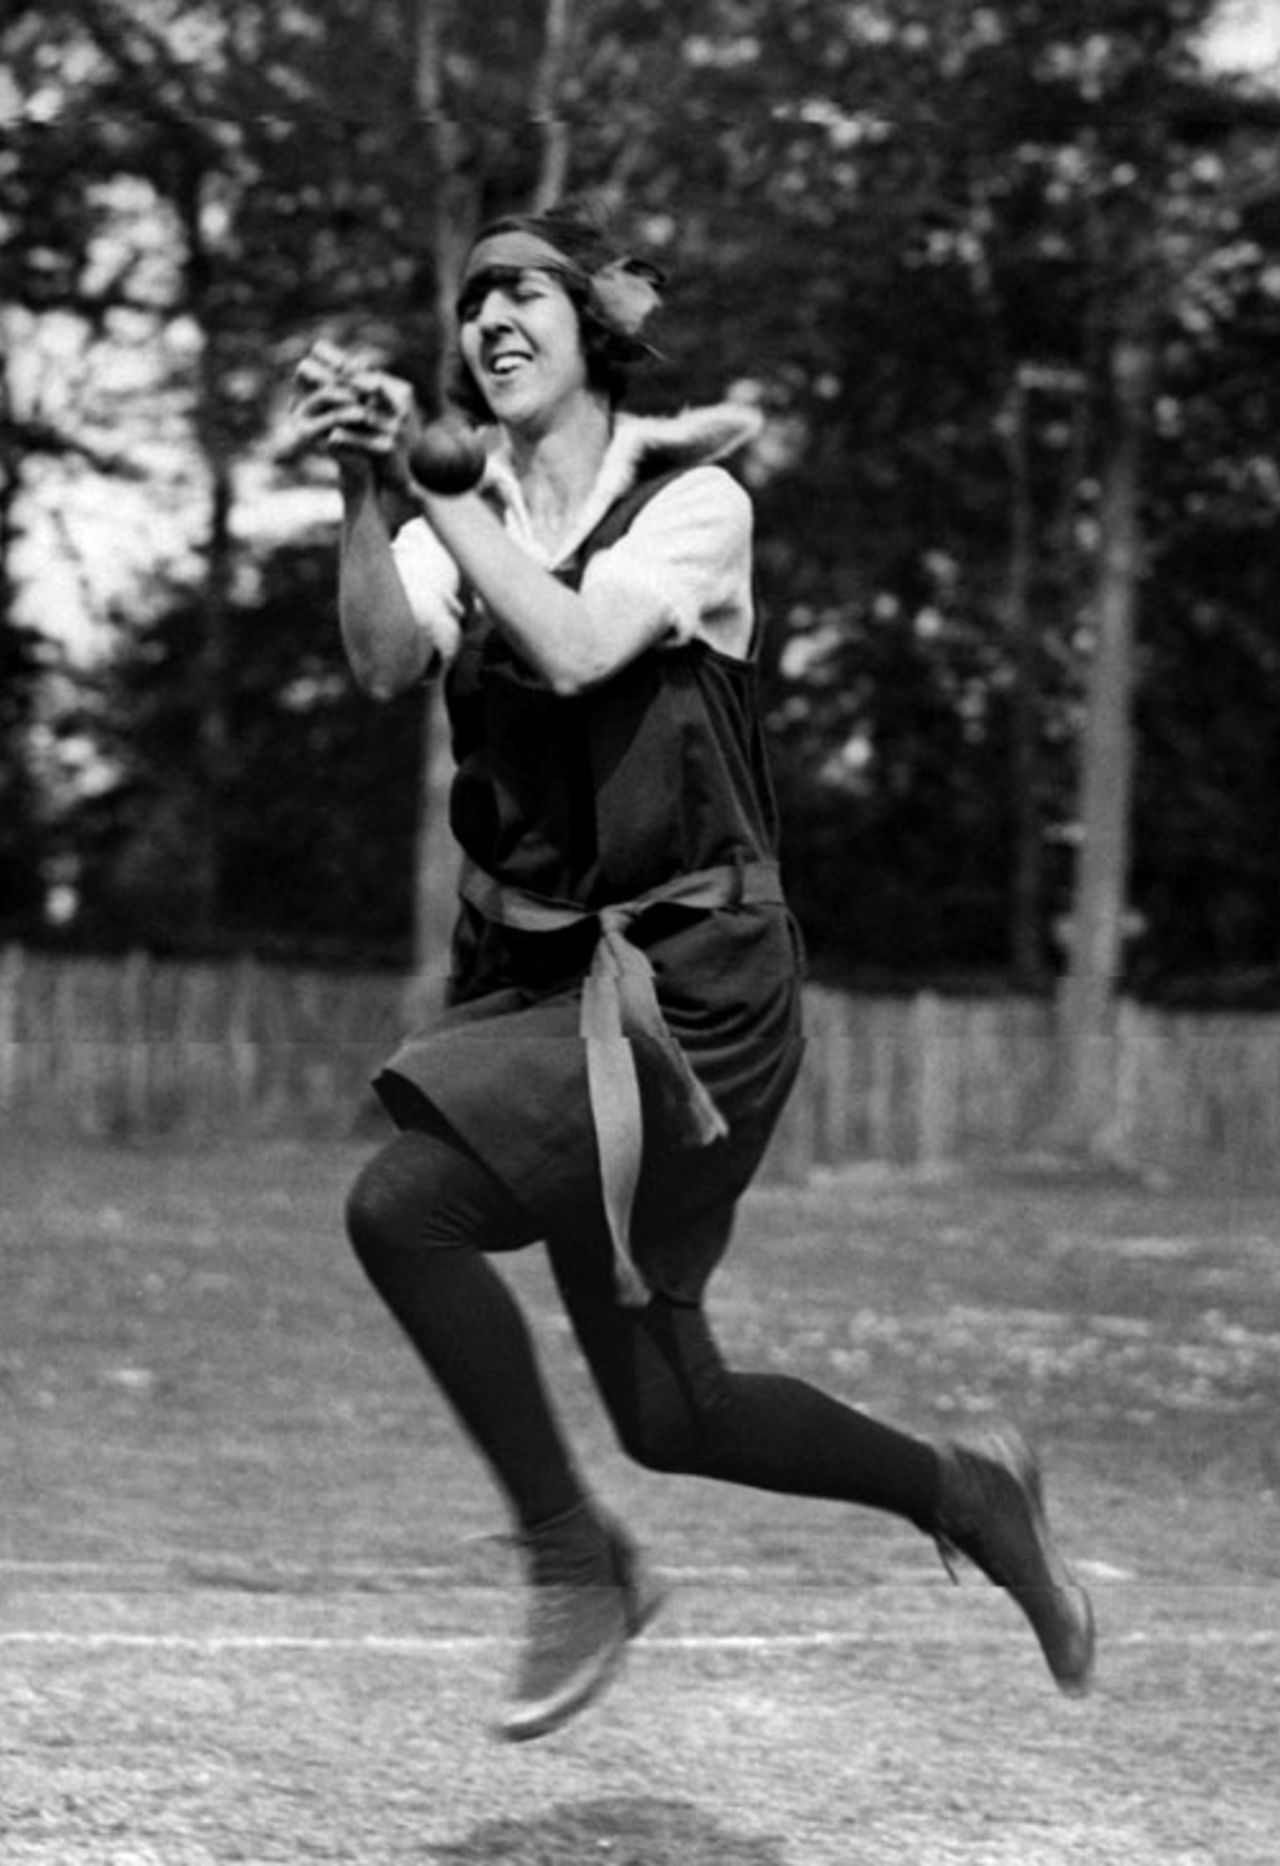  A member of the Addlestone women's cricket team misses a catch, 1924